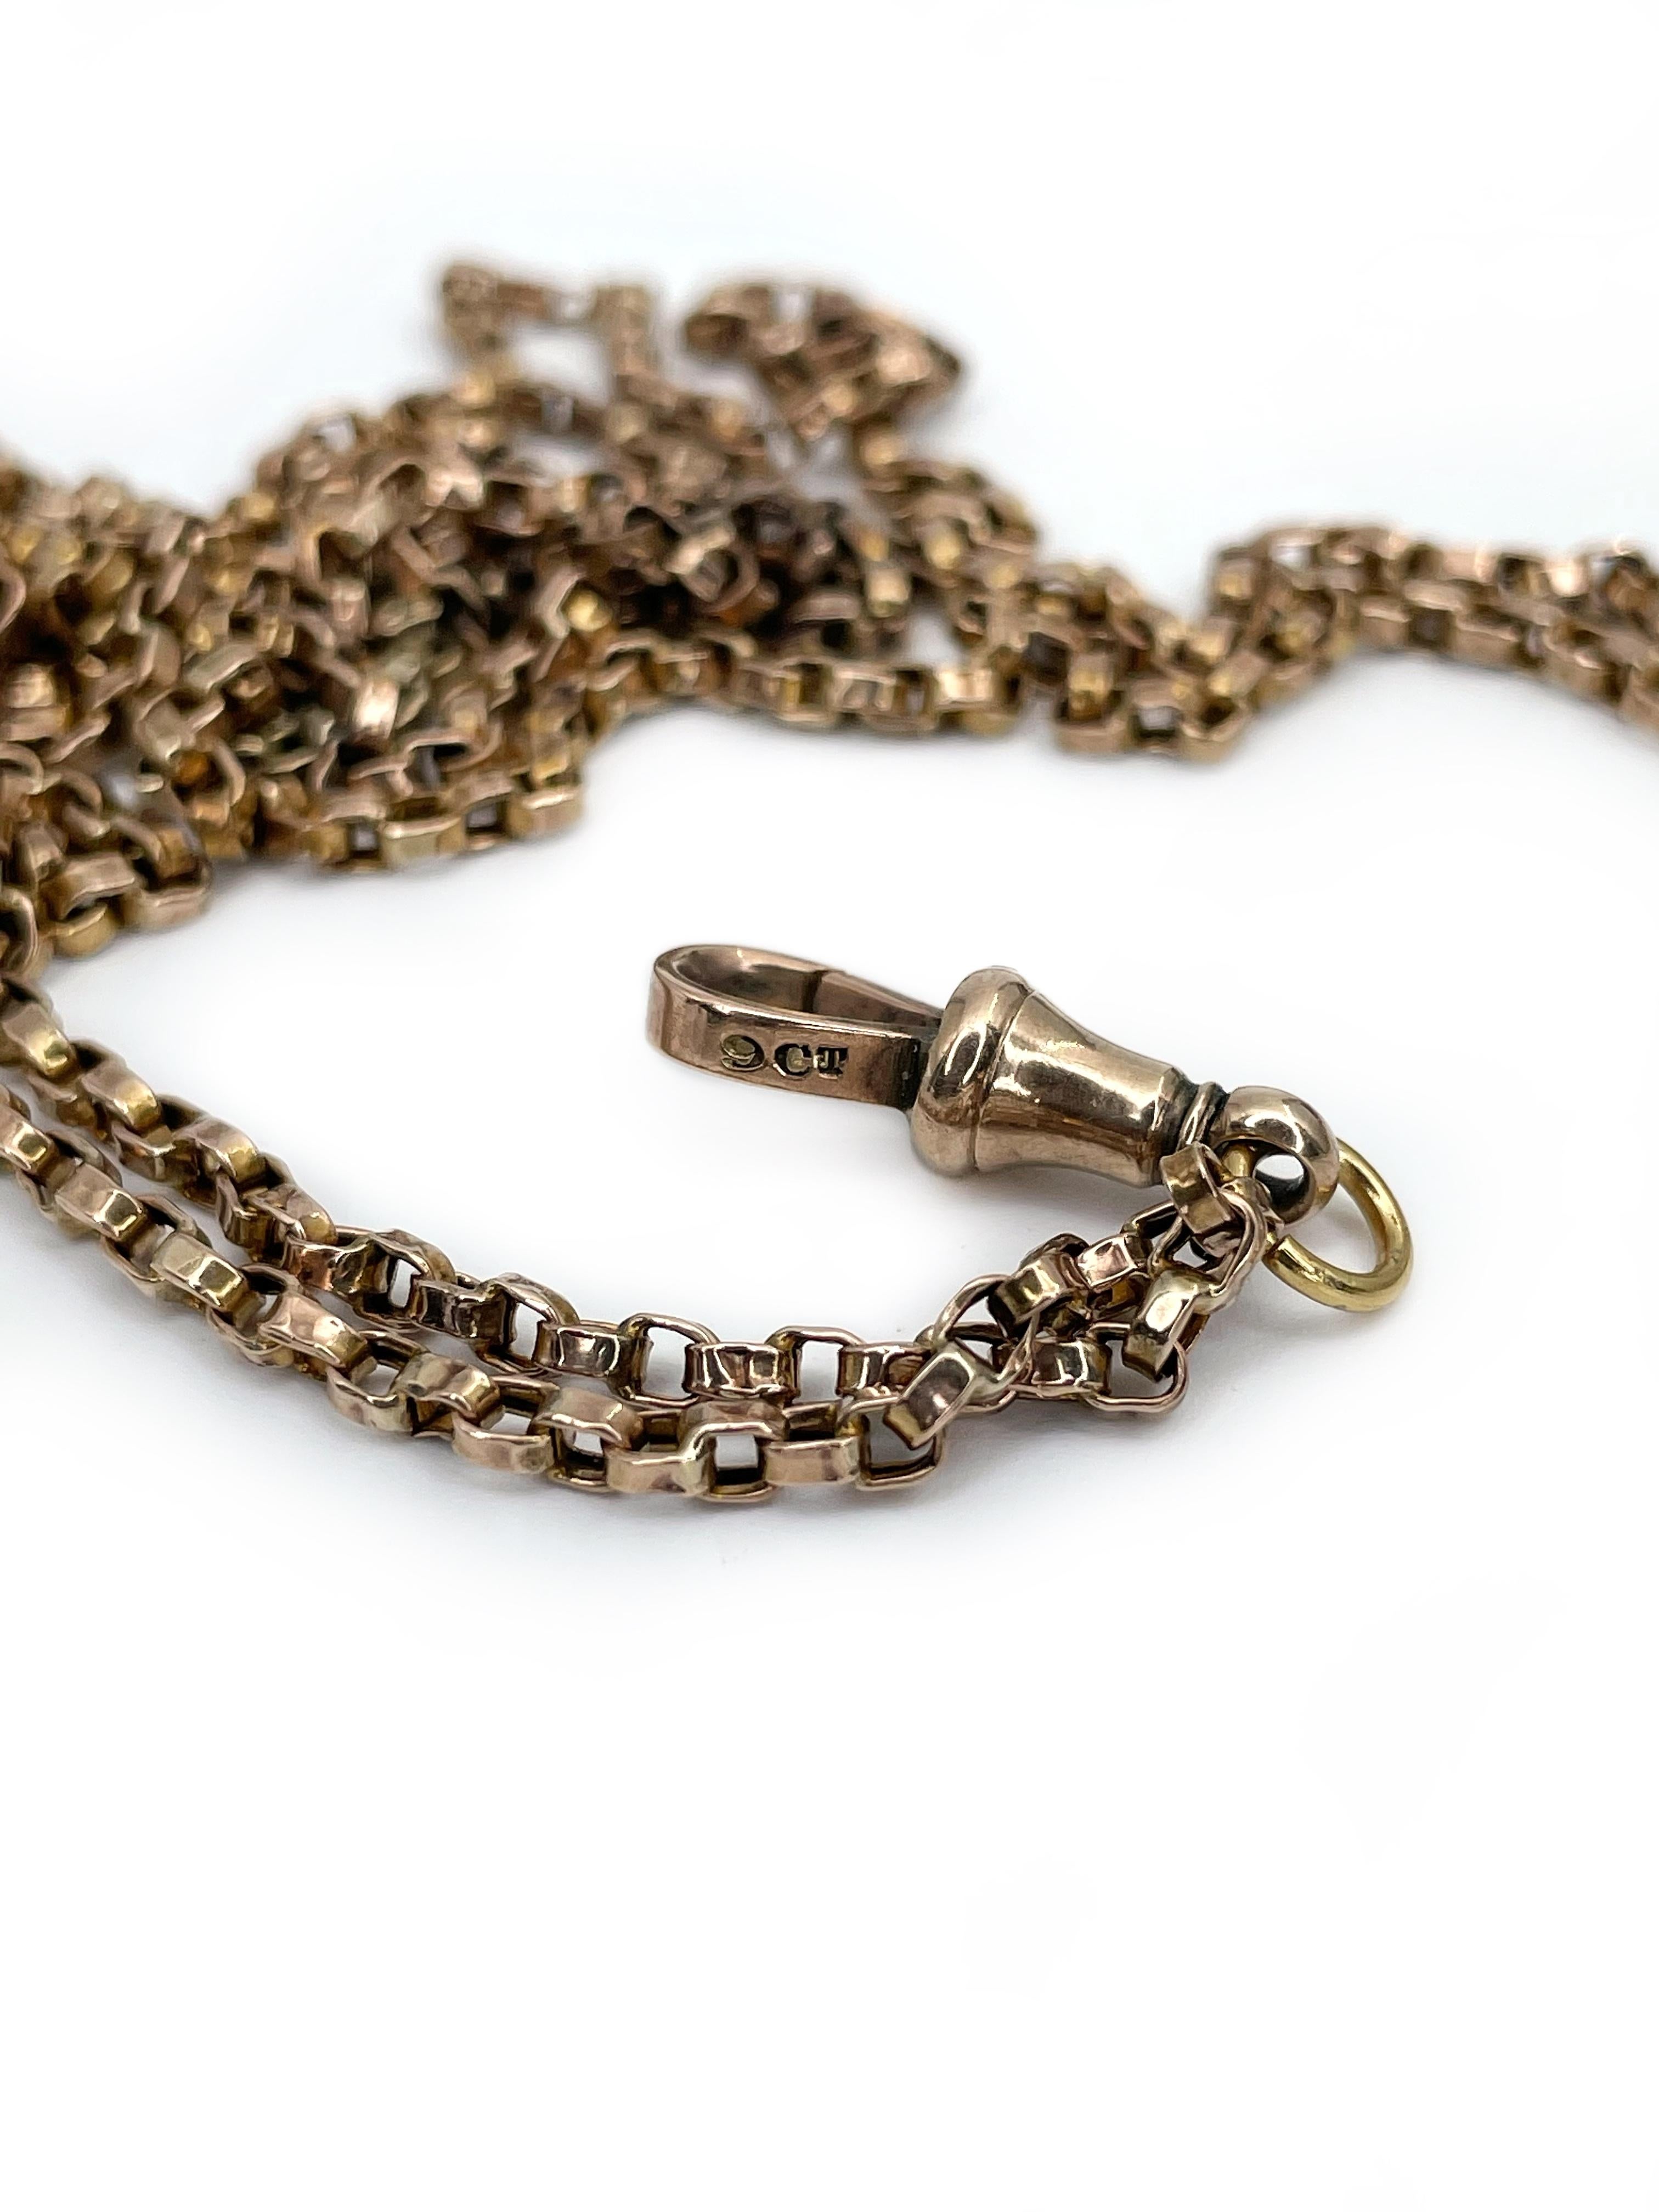 This is an antique Victorian long belcher guard chain necklace. It features a swivel dog clip that can be used to attach a pendant or fob. The chain is crafted in 9K gold. The colour is a warm rose with yellow hint. 

In Victorian times this chain